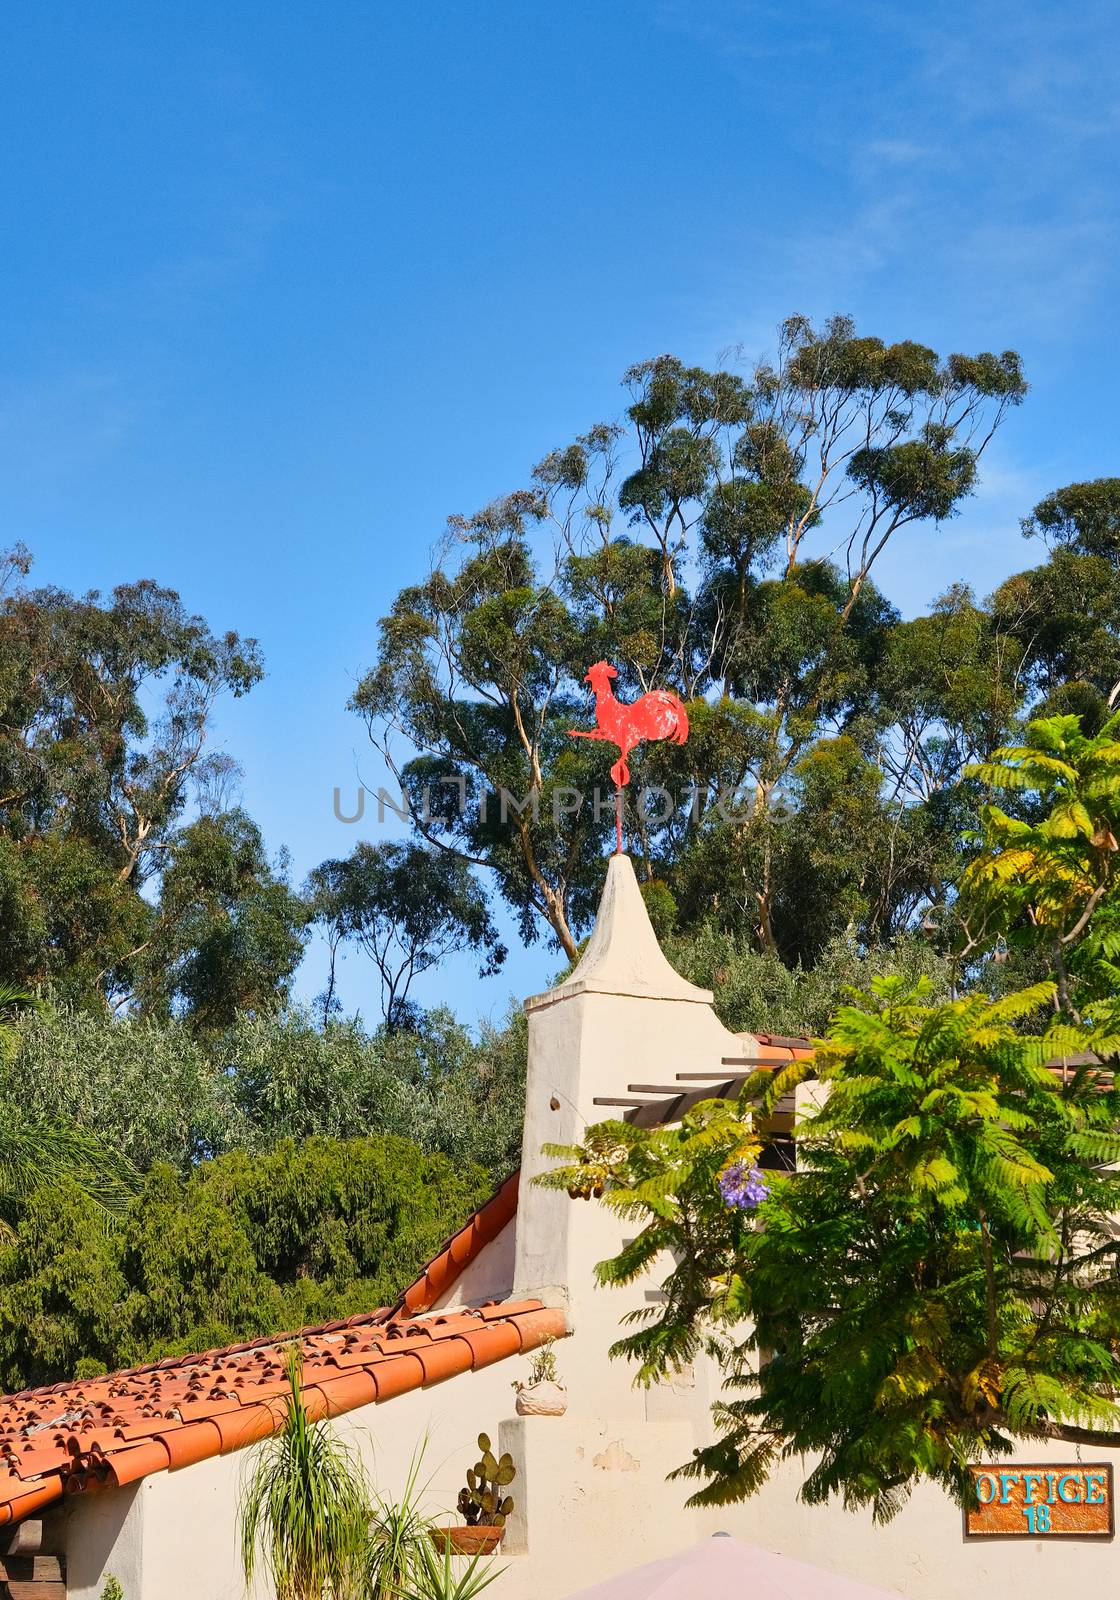 Rooster Windvane on Building Among Trees